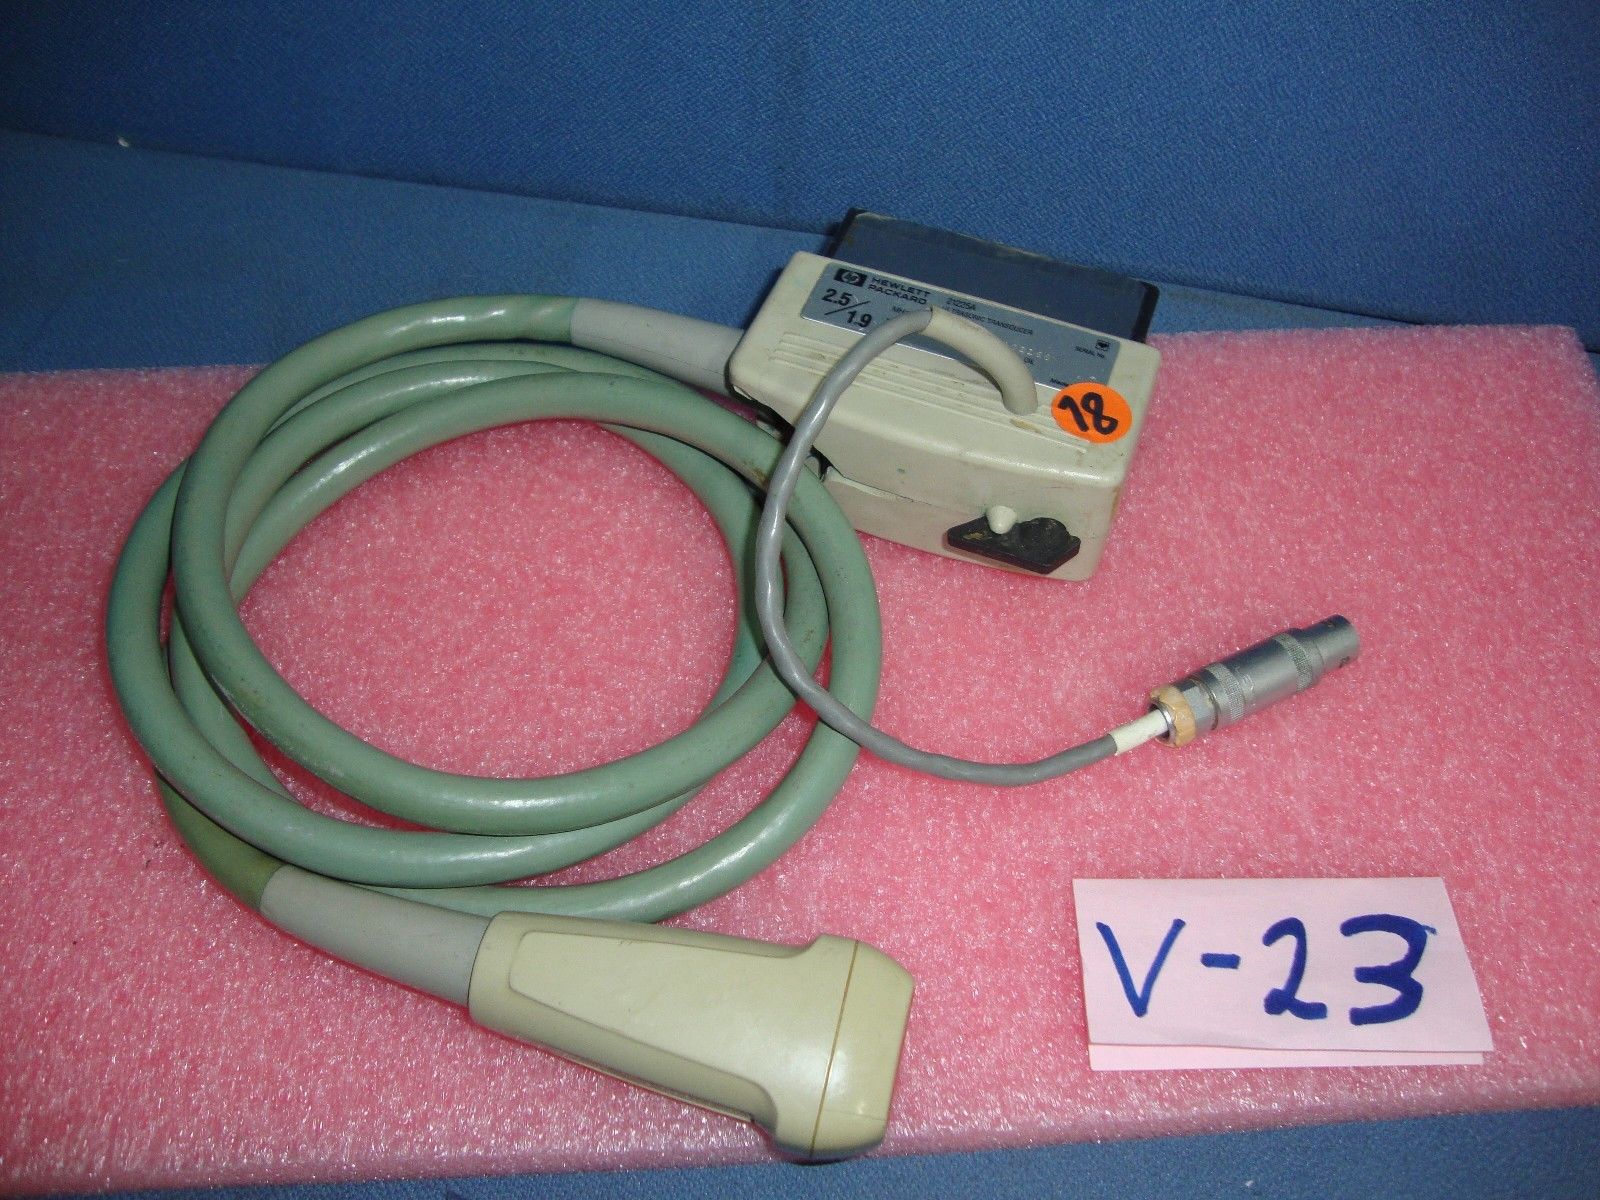 a medical device with a cord attached to it